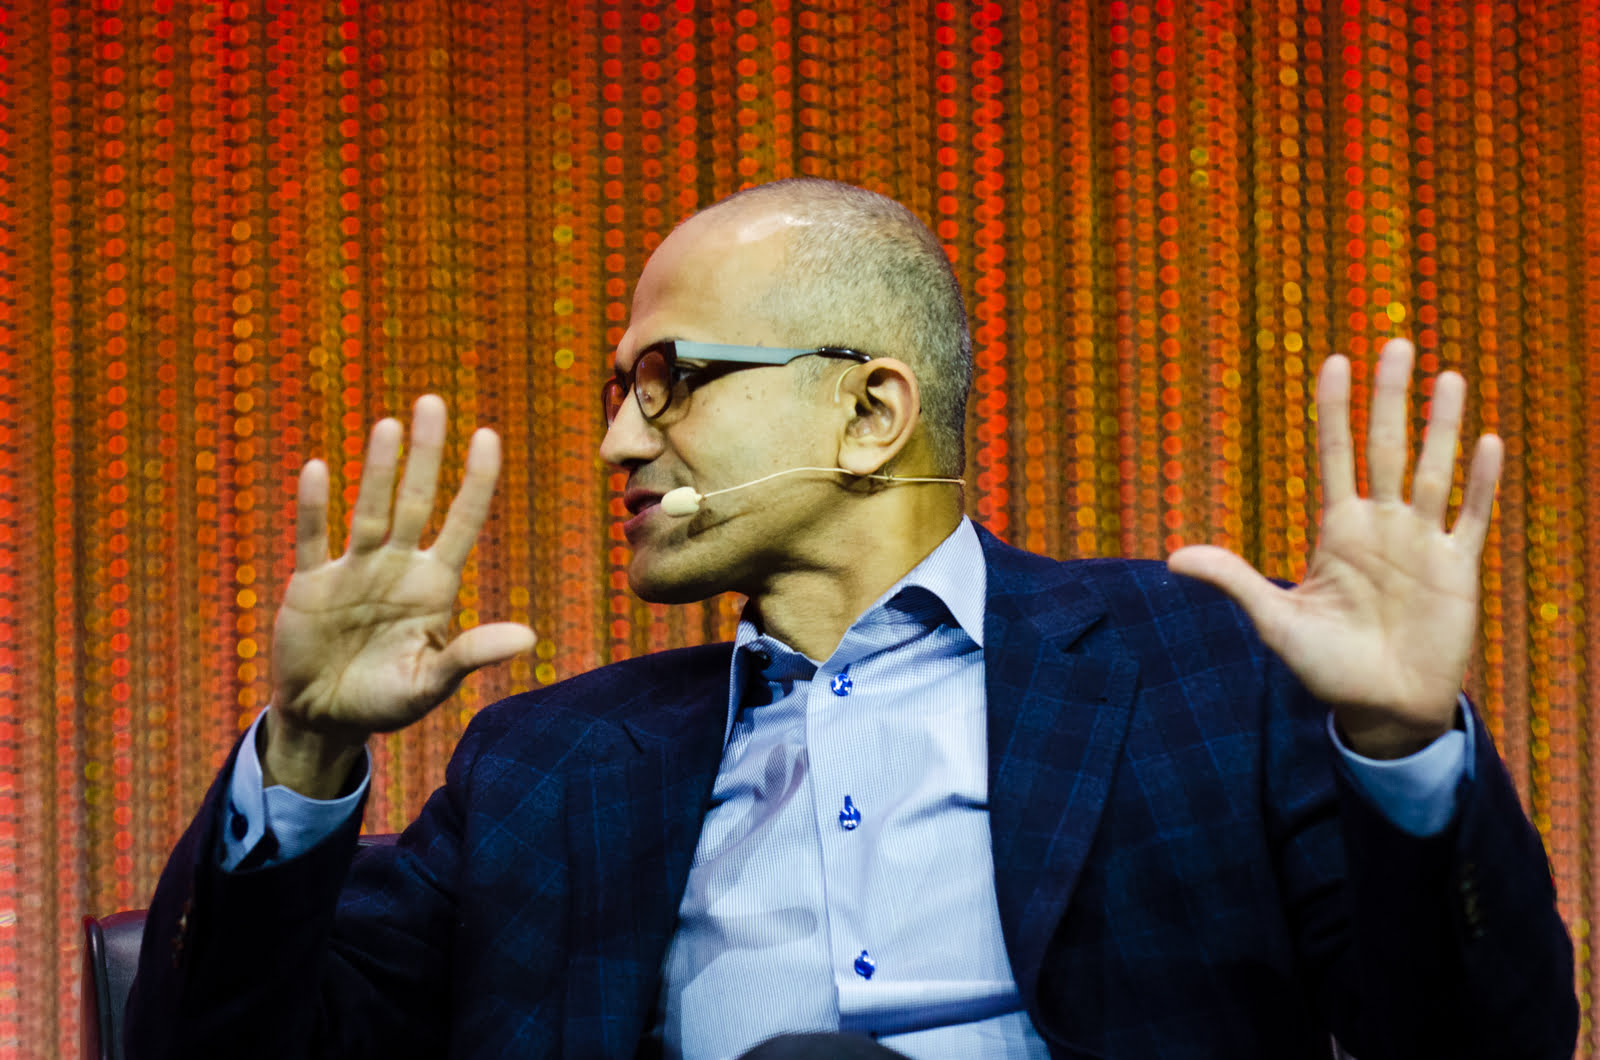 Microsoft CEO Satya Nadella says he overhyped Bing chat for search